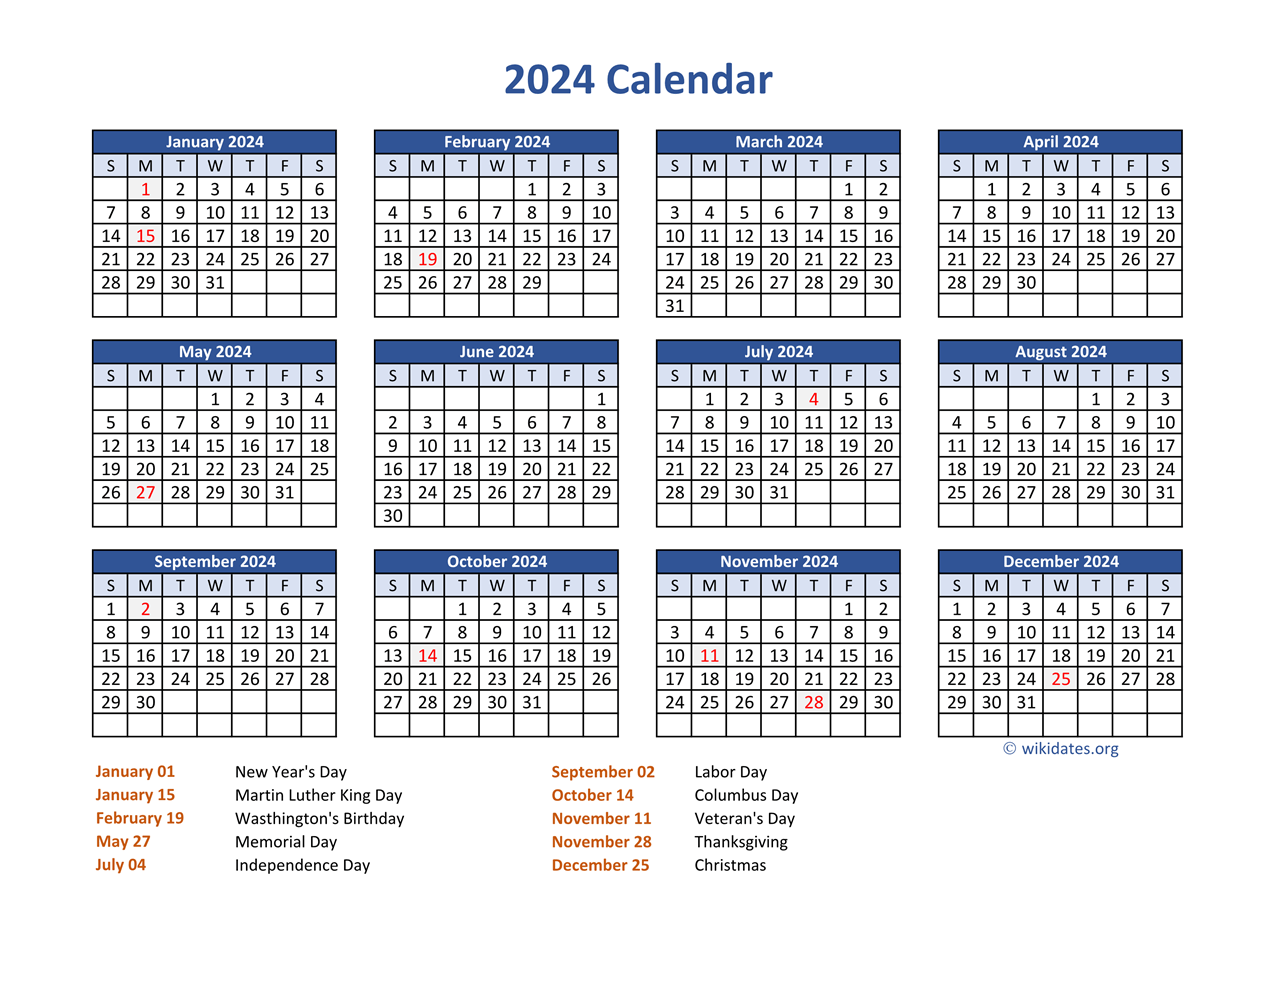 Pdf Calendar 2024 With Federal Holidays | Wikidates for Calendar 2024 With Holidays Printable